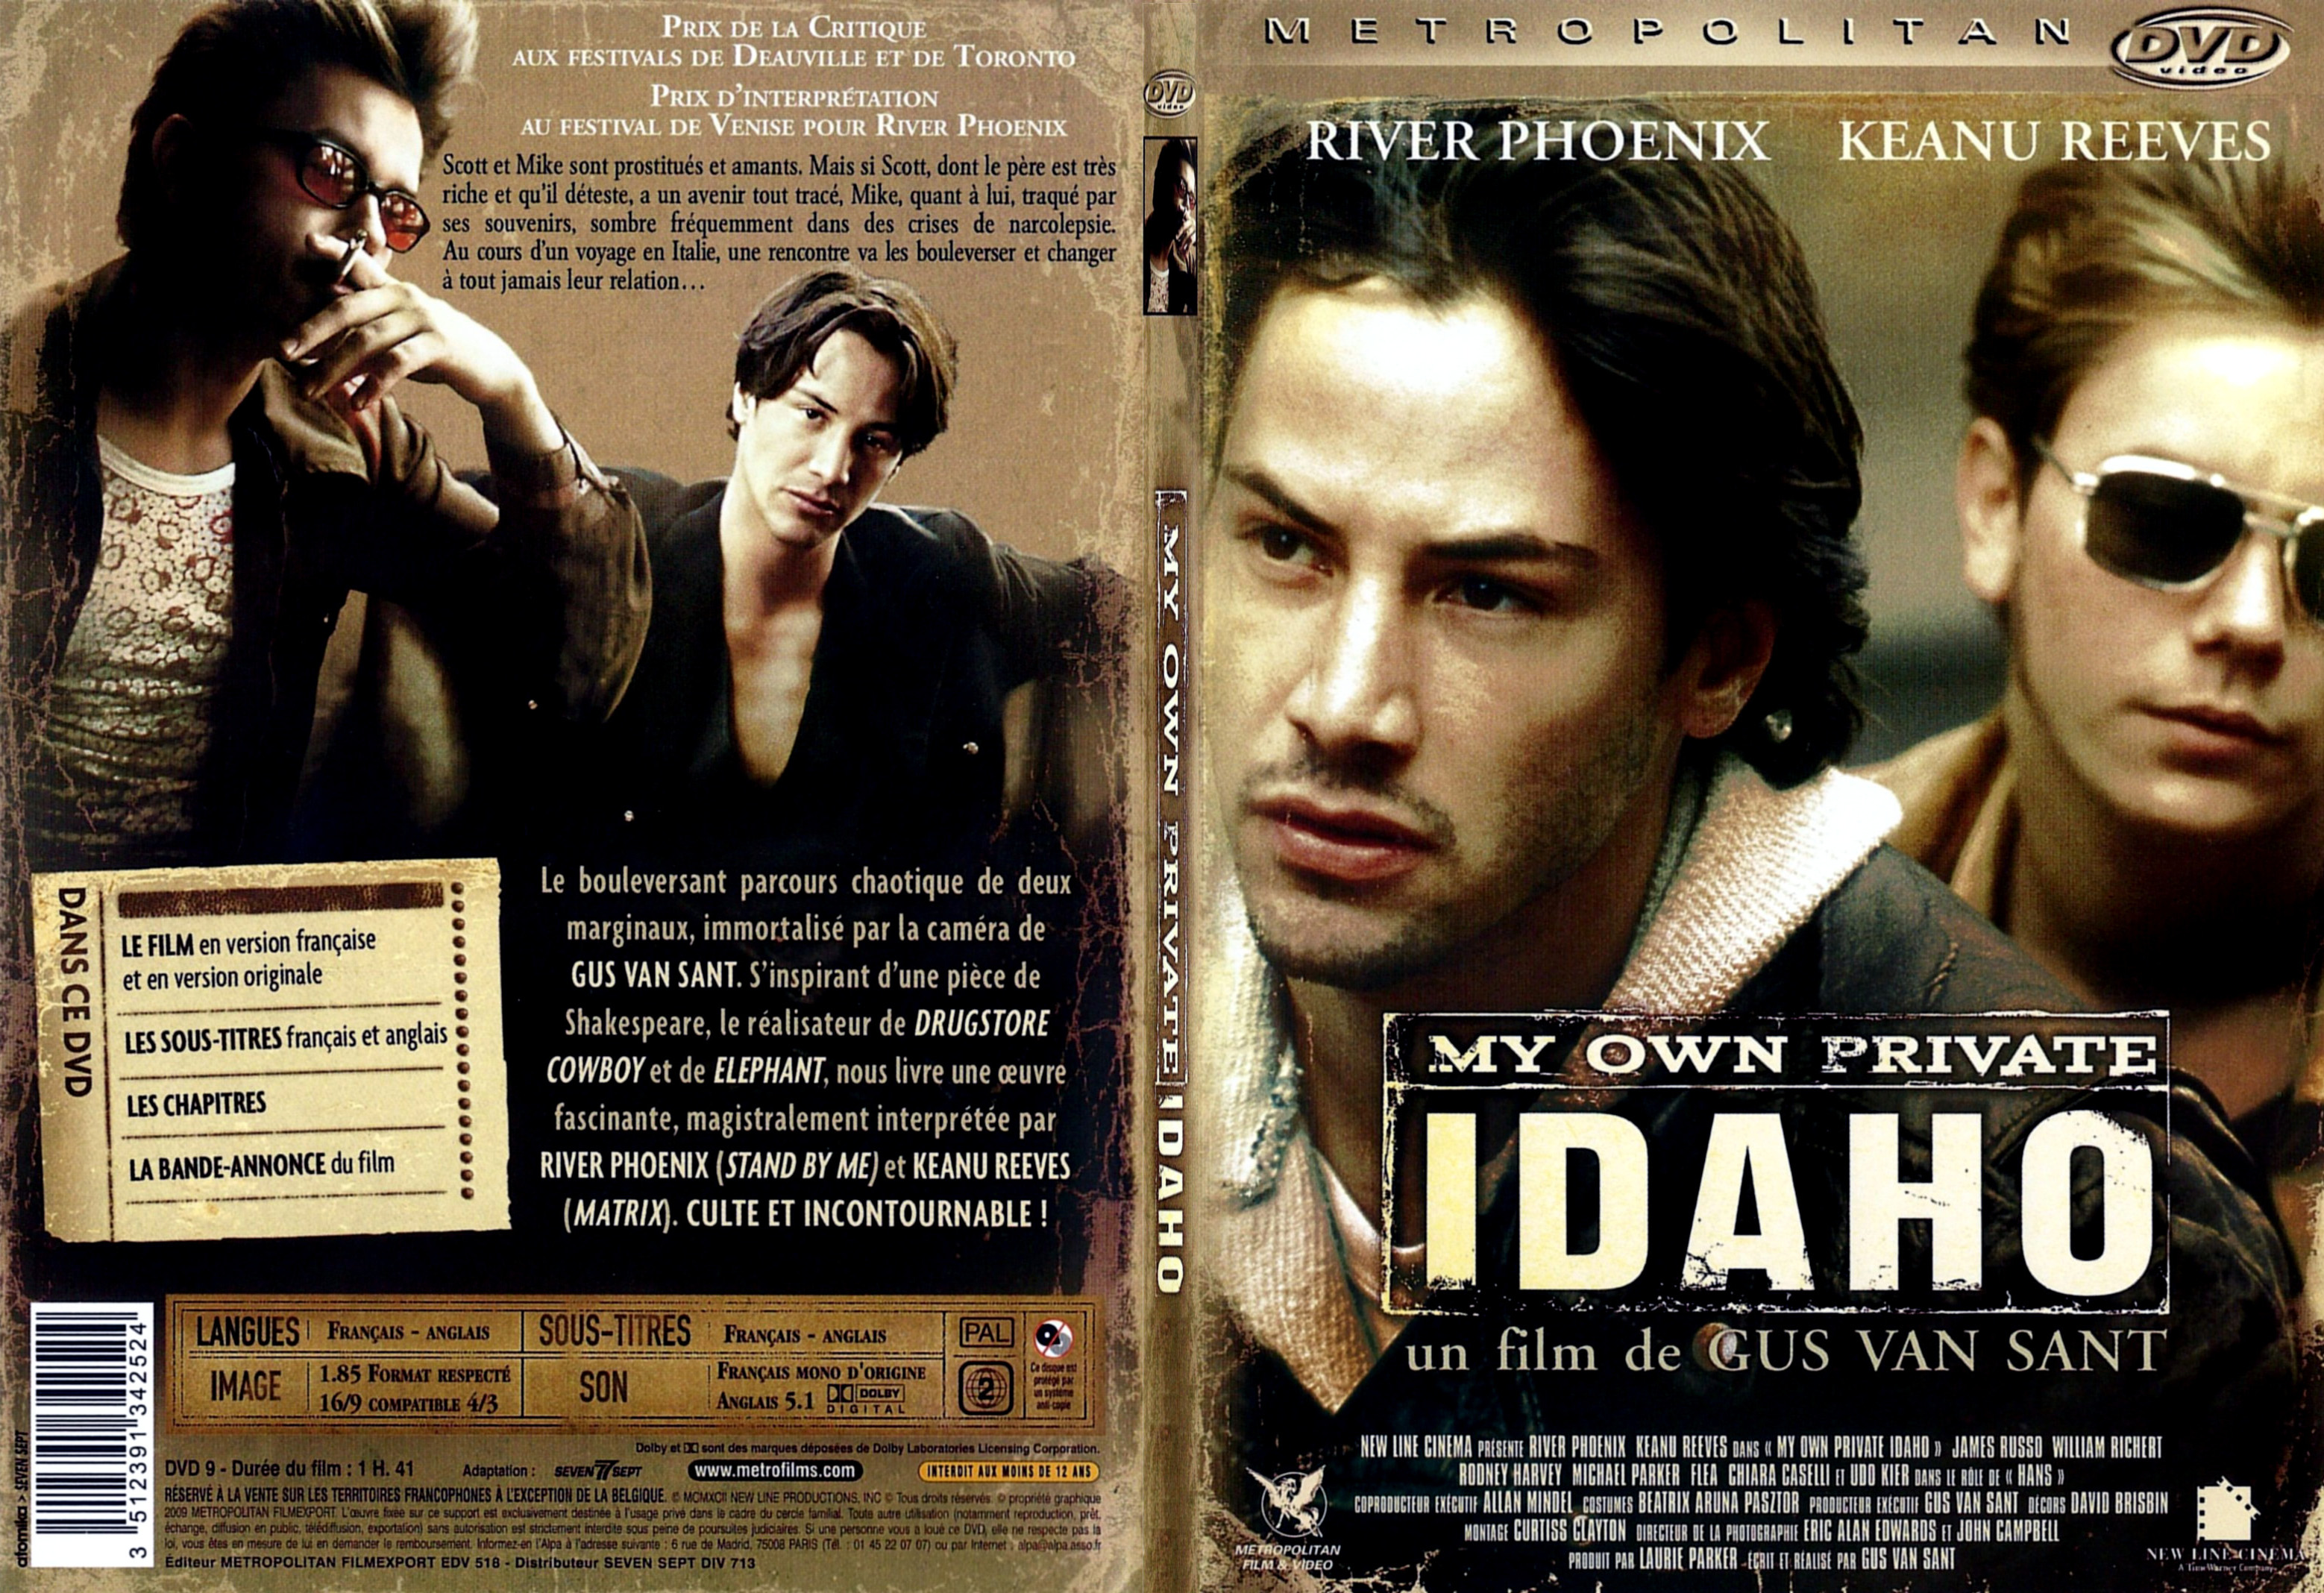 Jaquette DVD My own private Idaho - SLIM v2